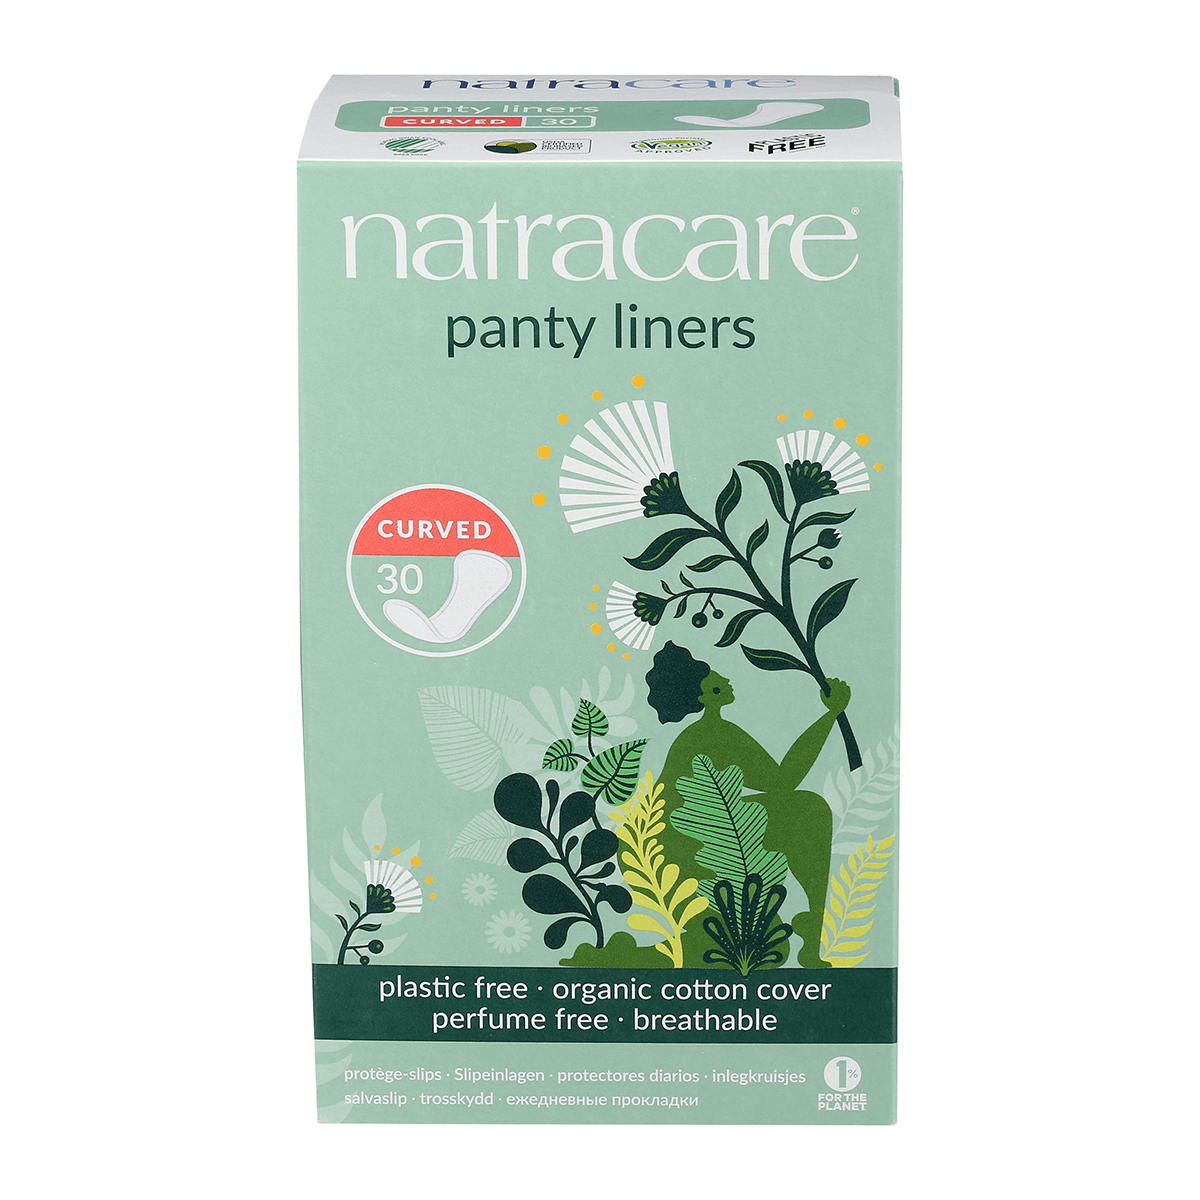 NatraCare Organic Panty Liners Curved 30 Liners Feminine Sanitary Supplies at Village Vitamin Store